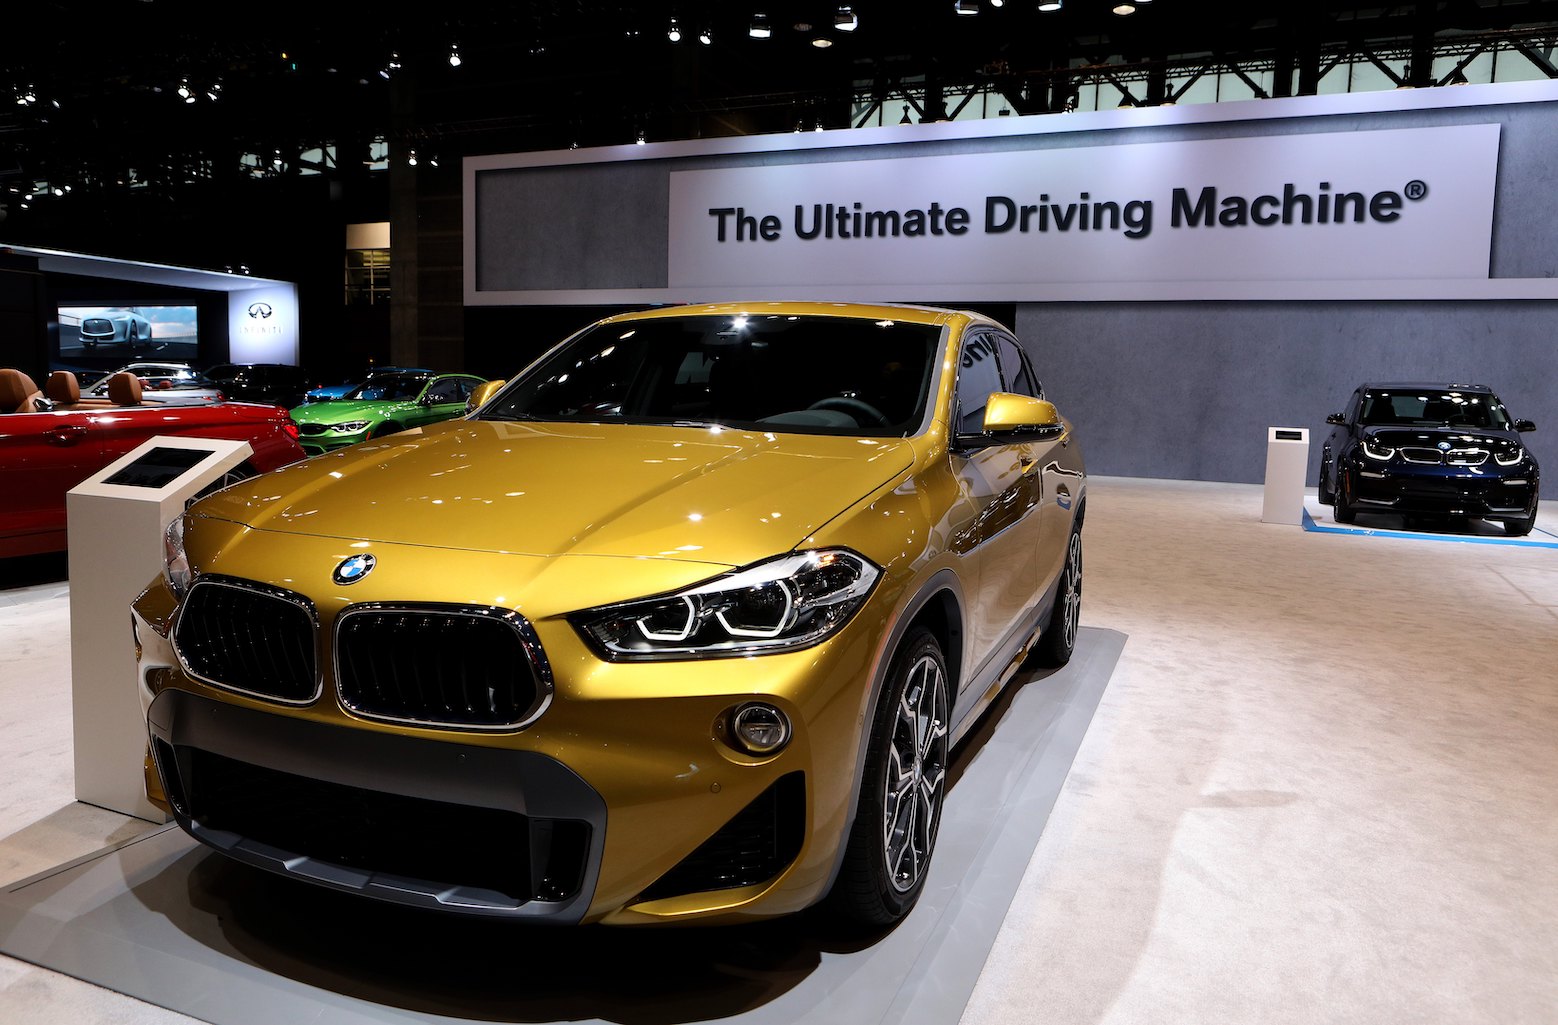 2018 BMW X2 XDrive 28i is on display at the 110th Annual Chicago Auto Show